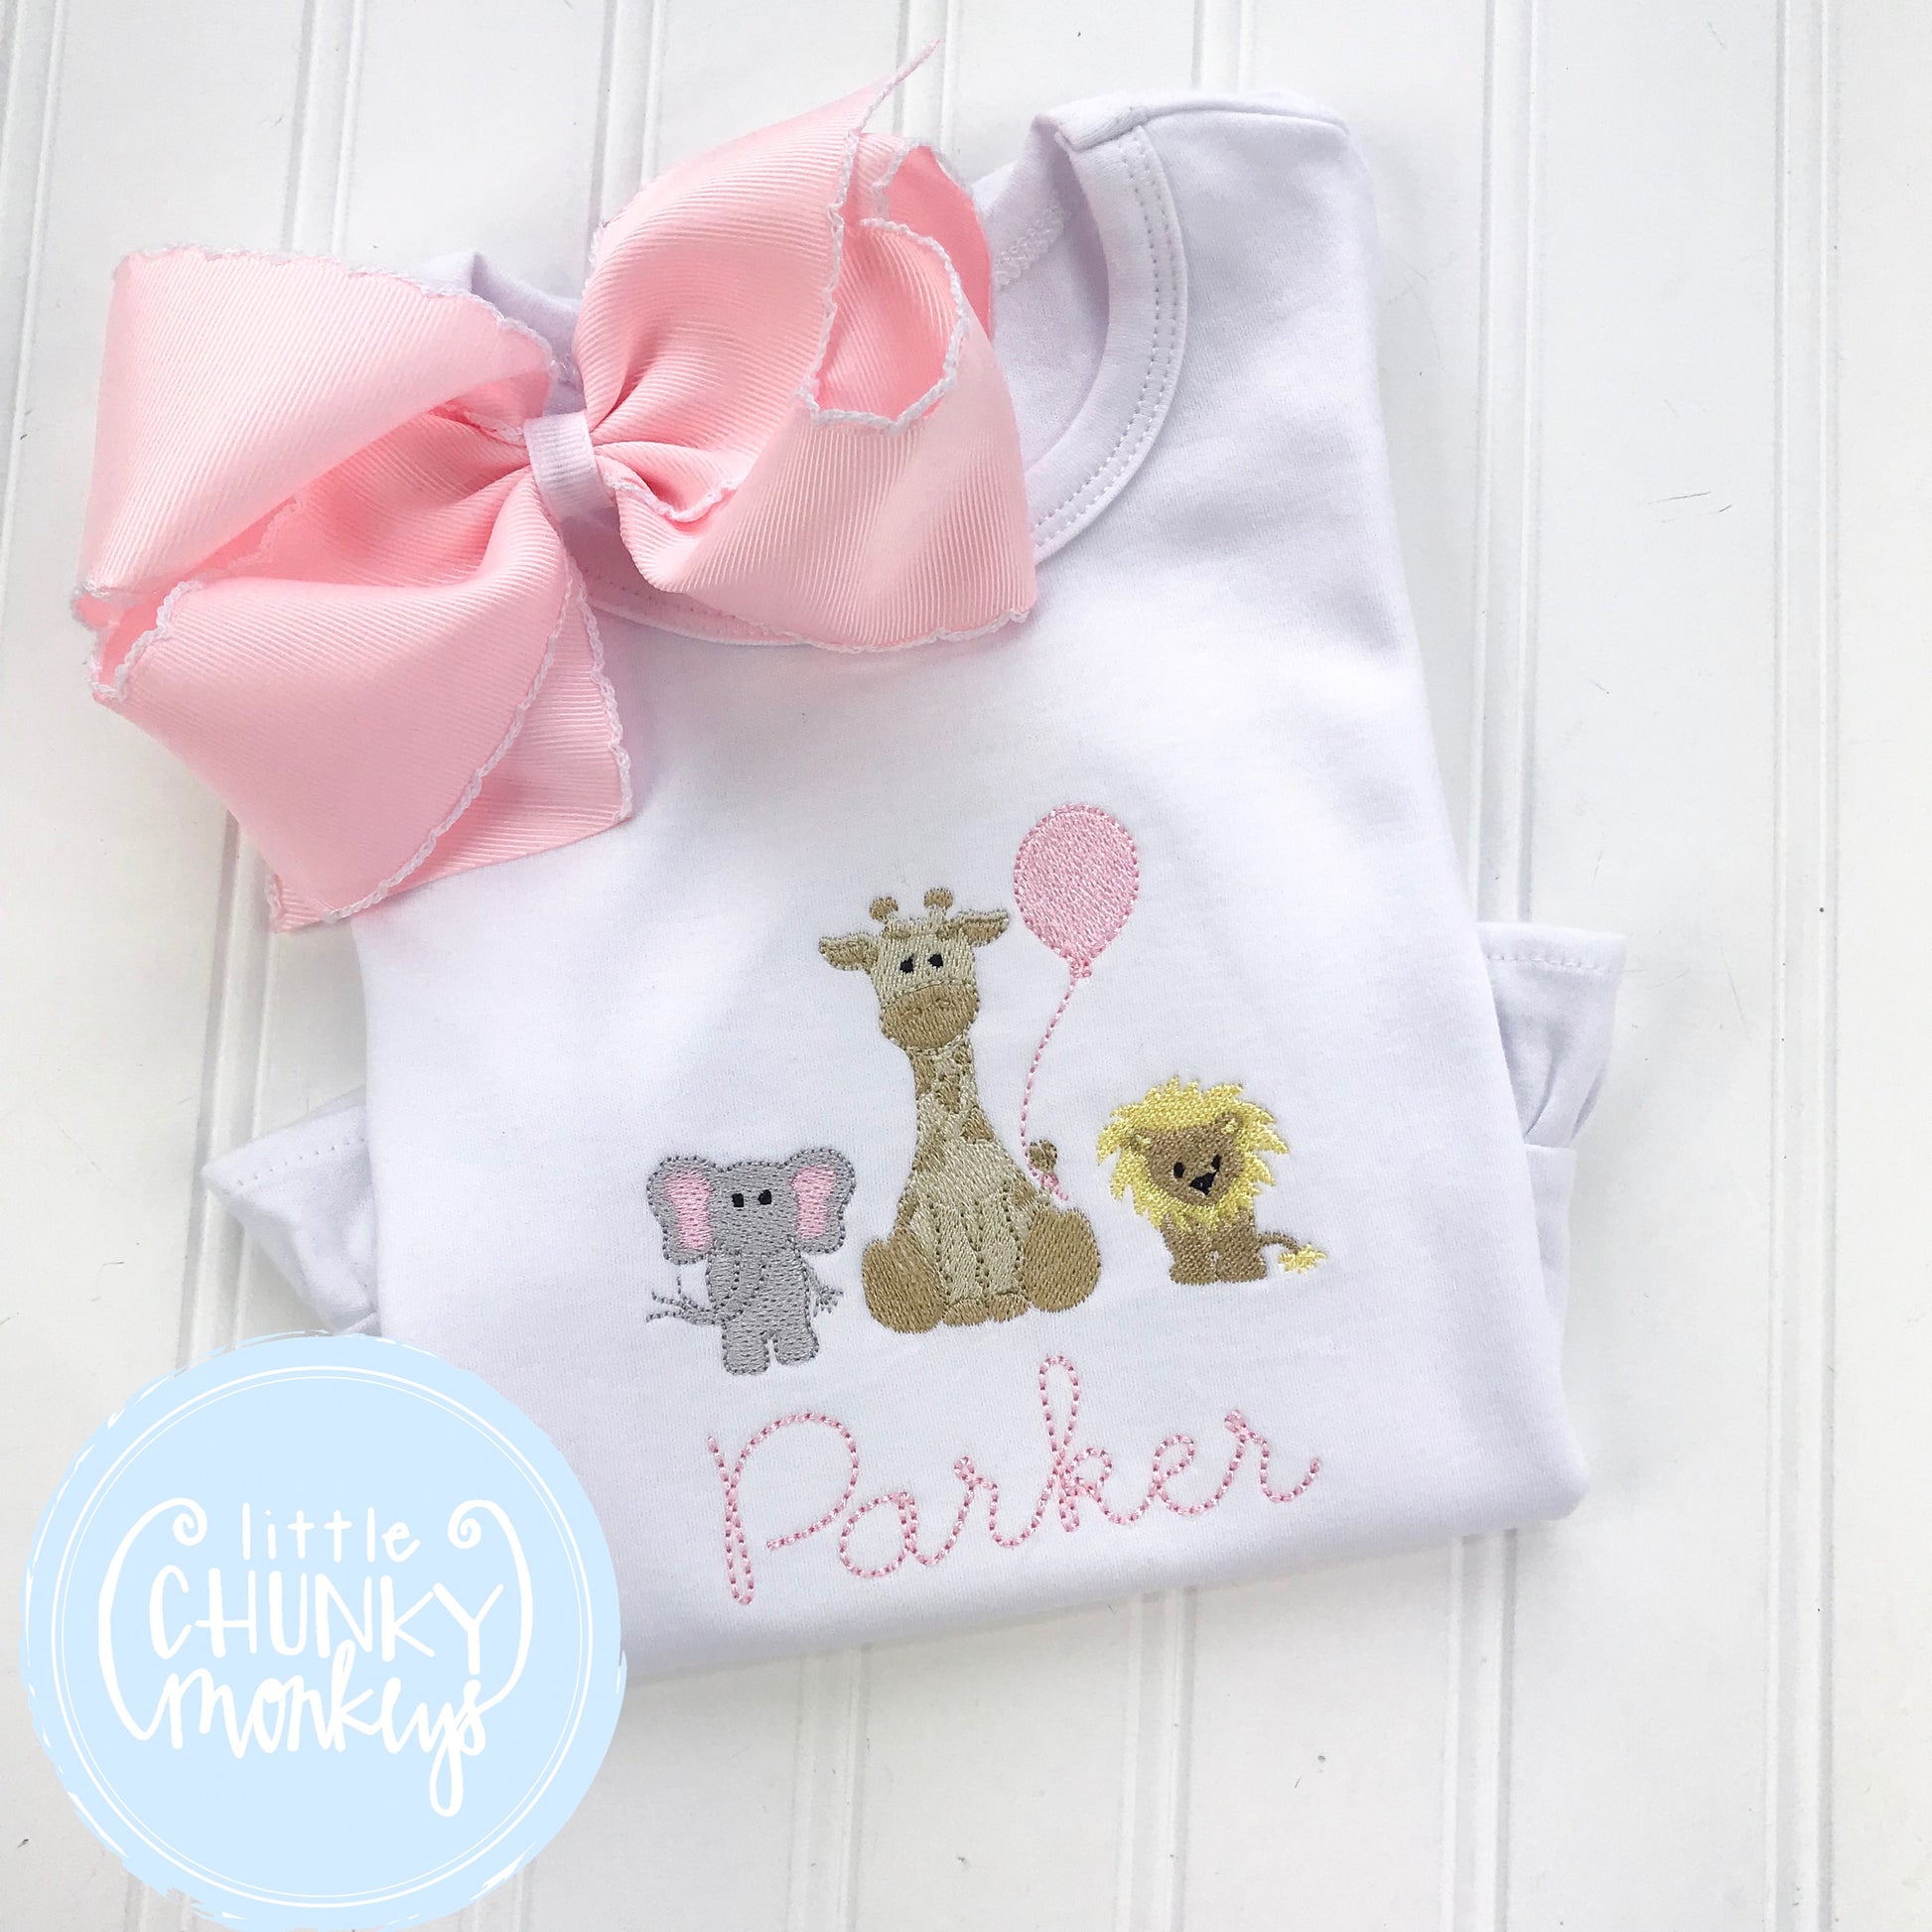 Girl Shirt - Girl Shirt - Stitched Zoo Animal Trio with Personalization